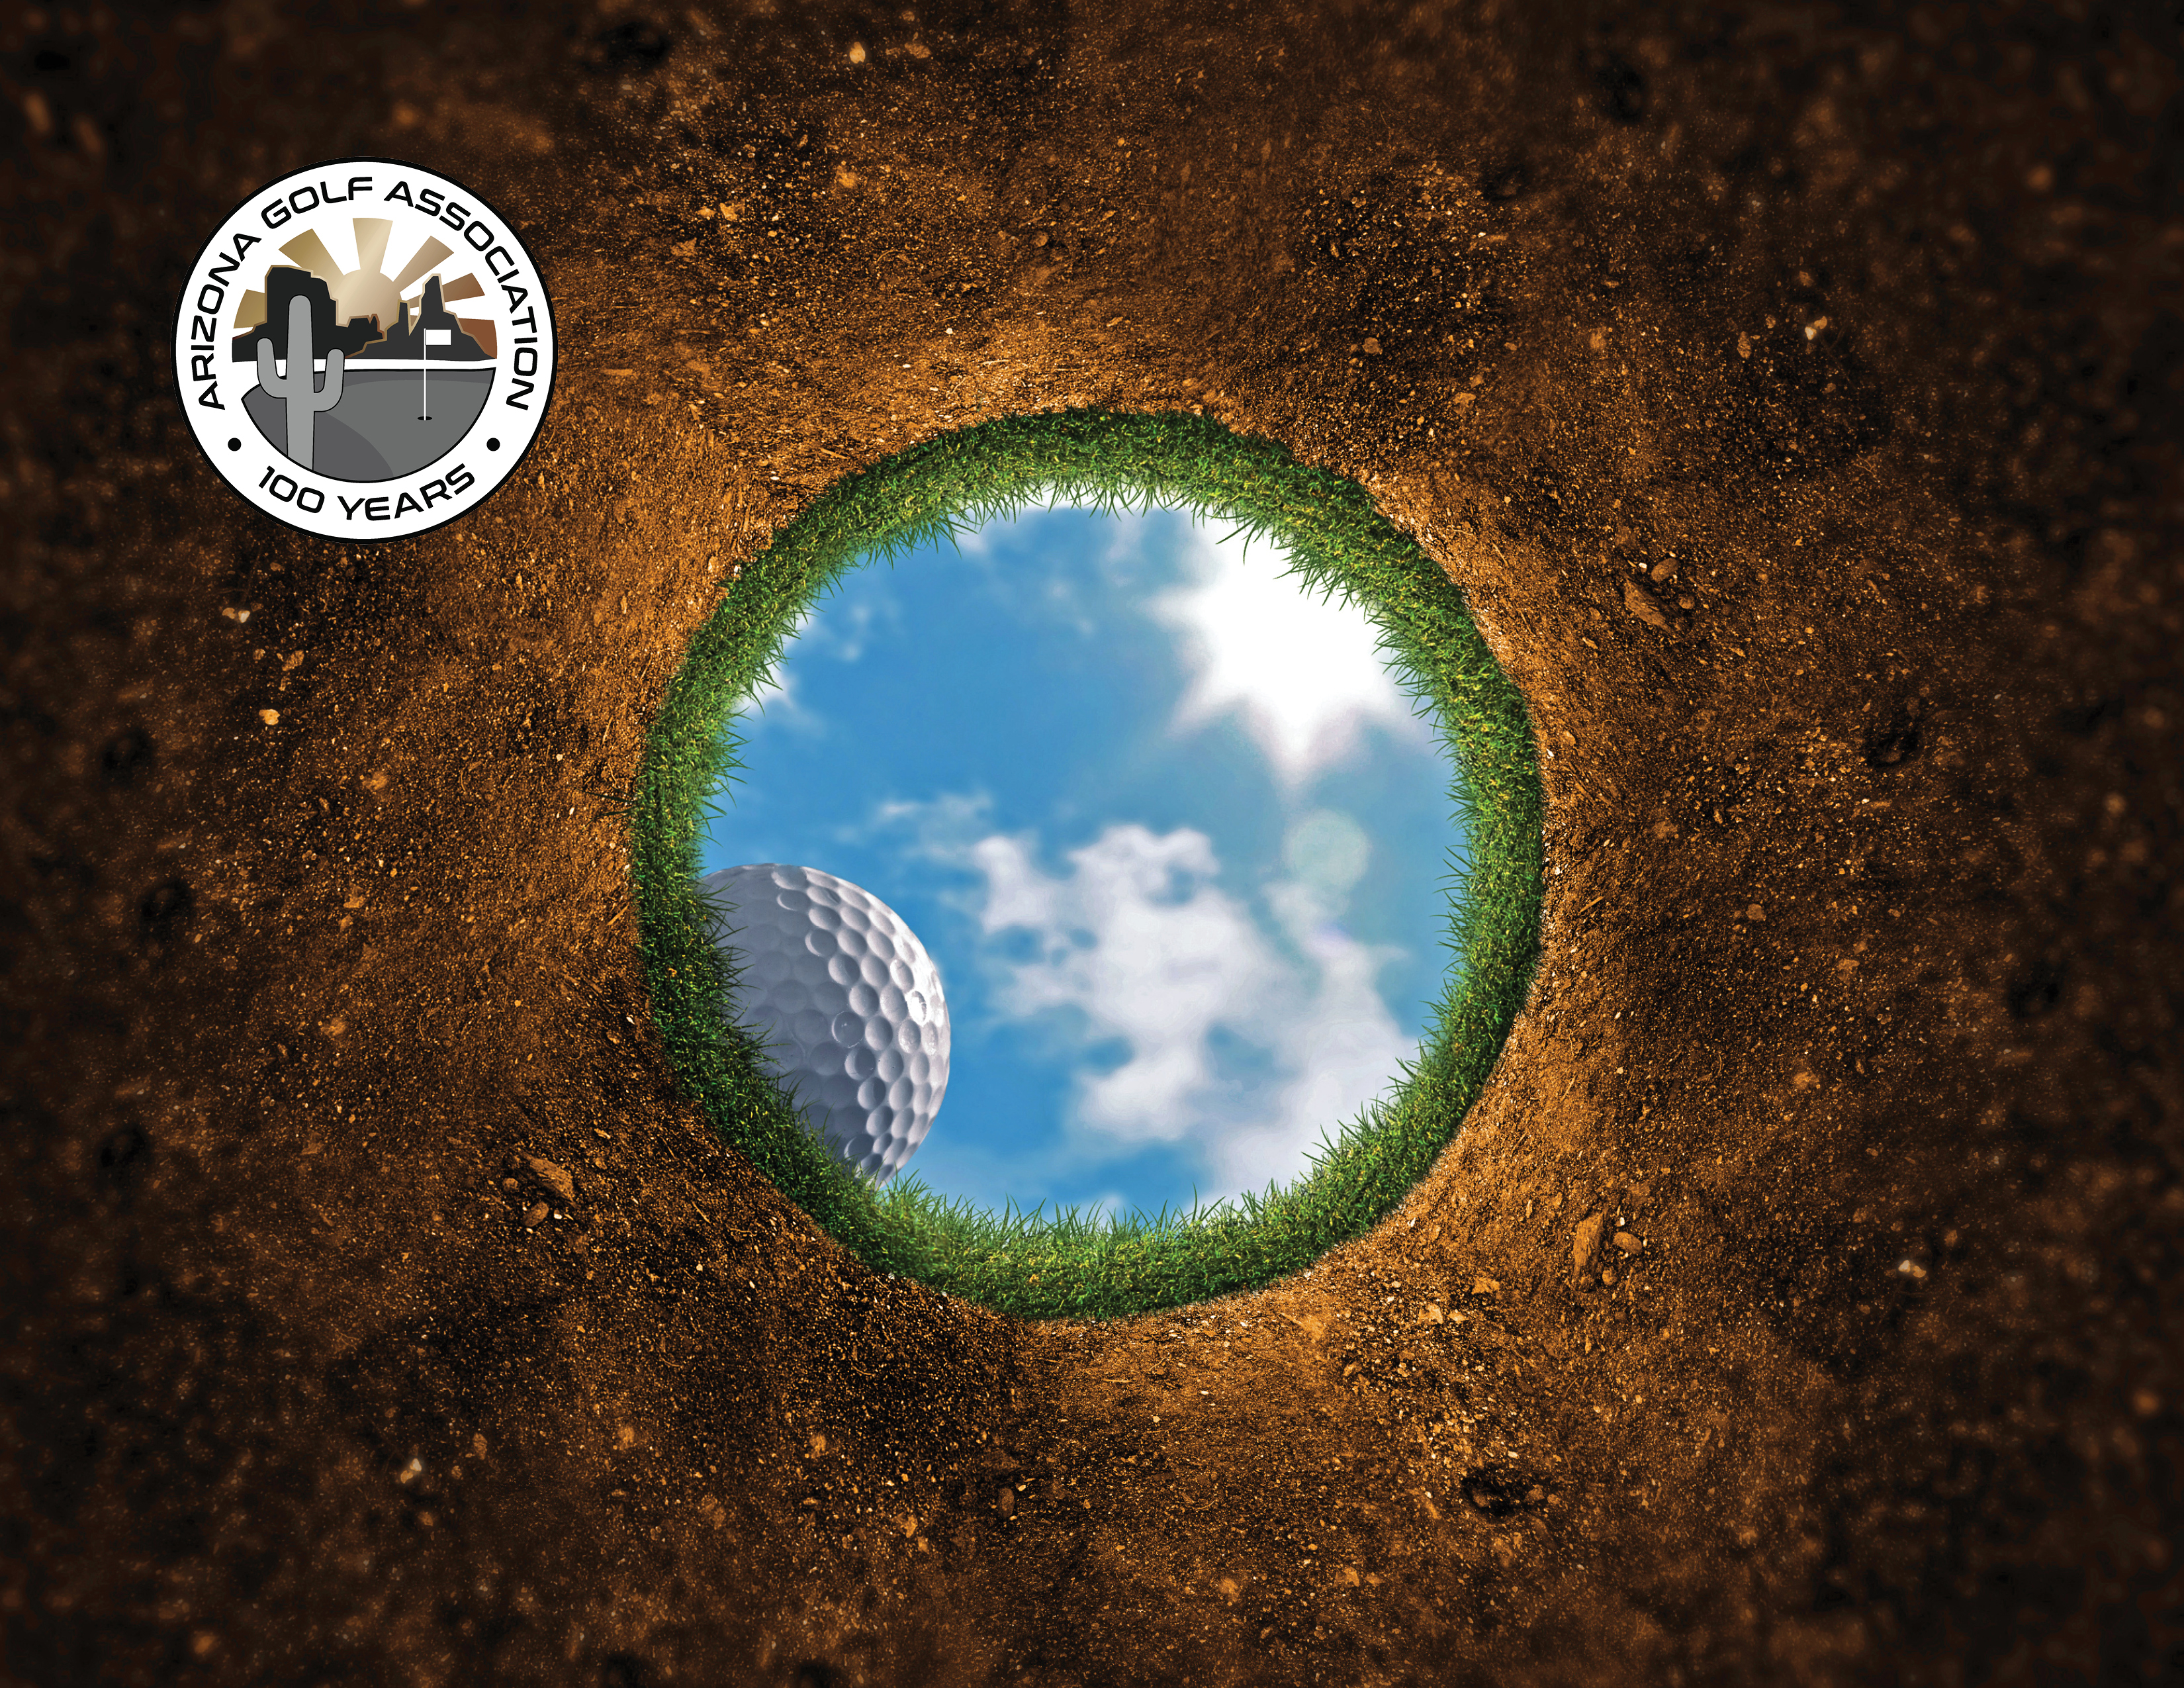 Ball over hanging hole with 100 years logo